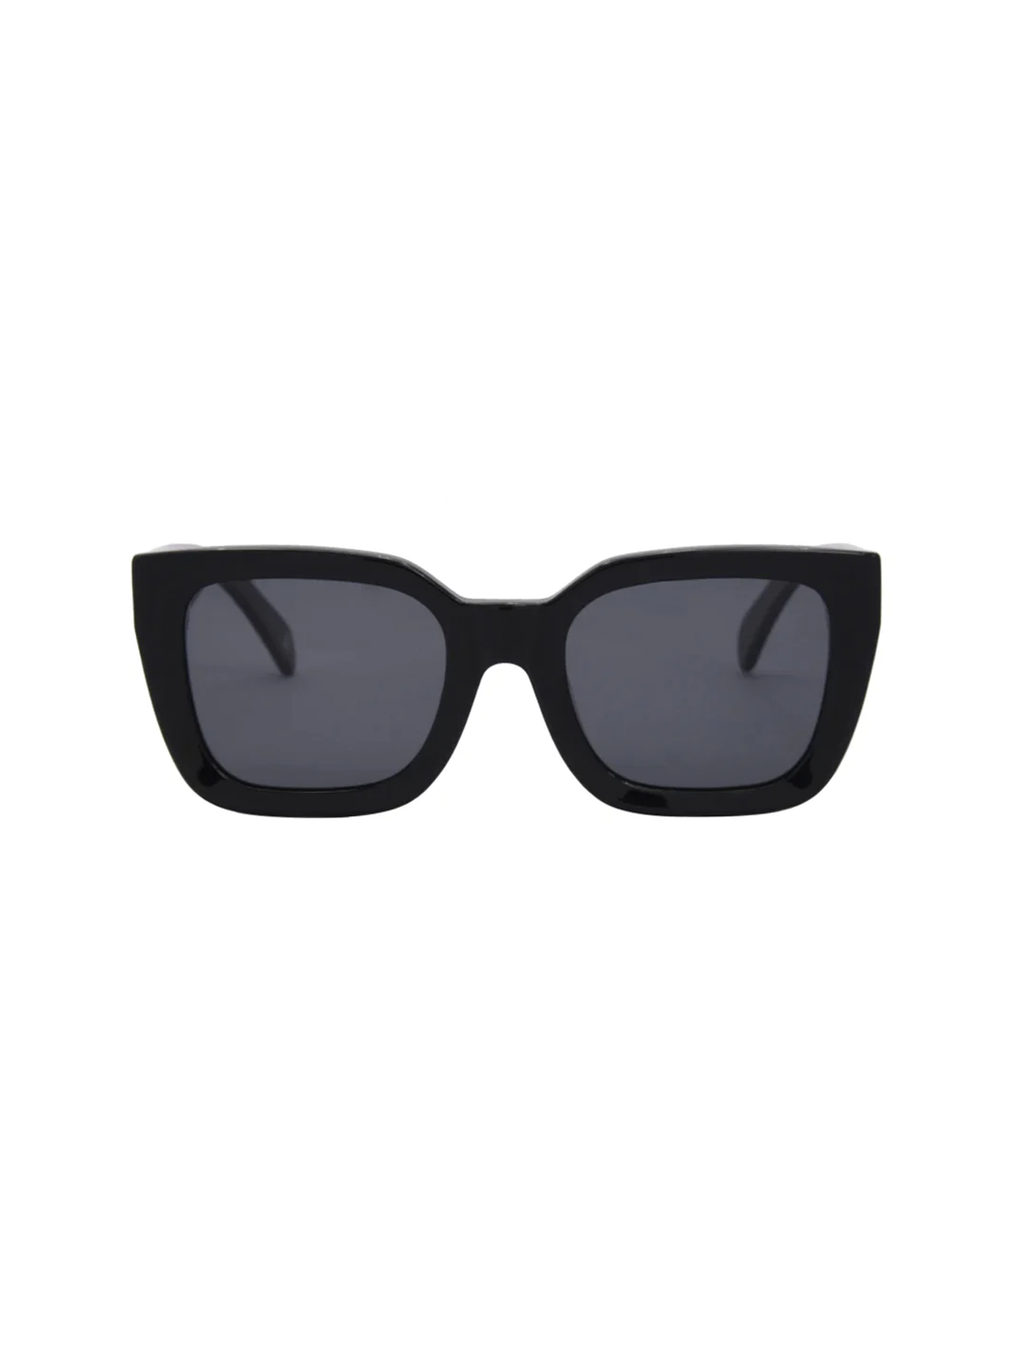 Alden Sunnies in Black/Smoke - Stitch And Feather